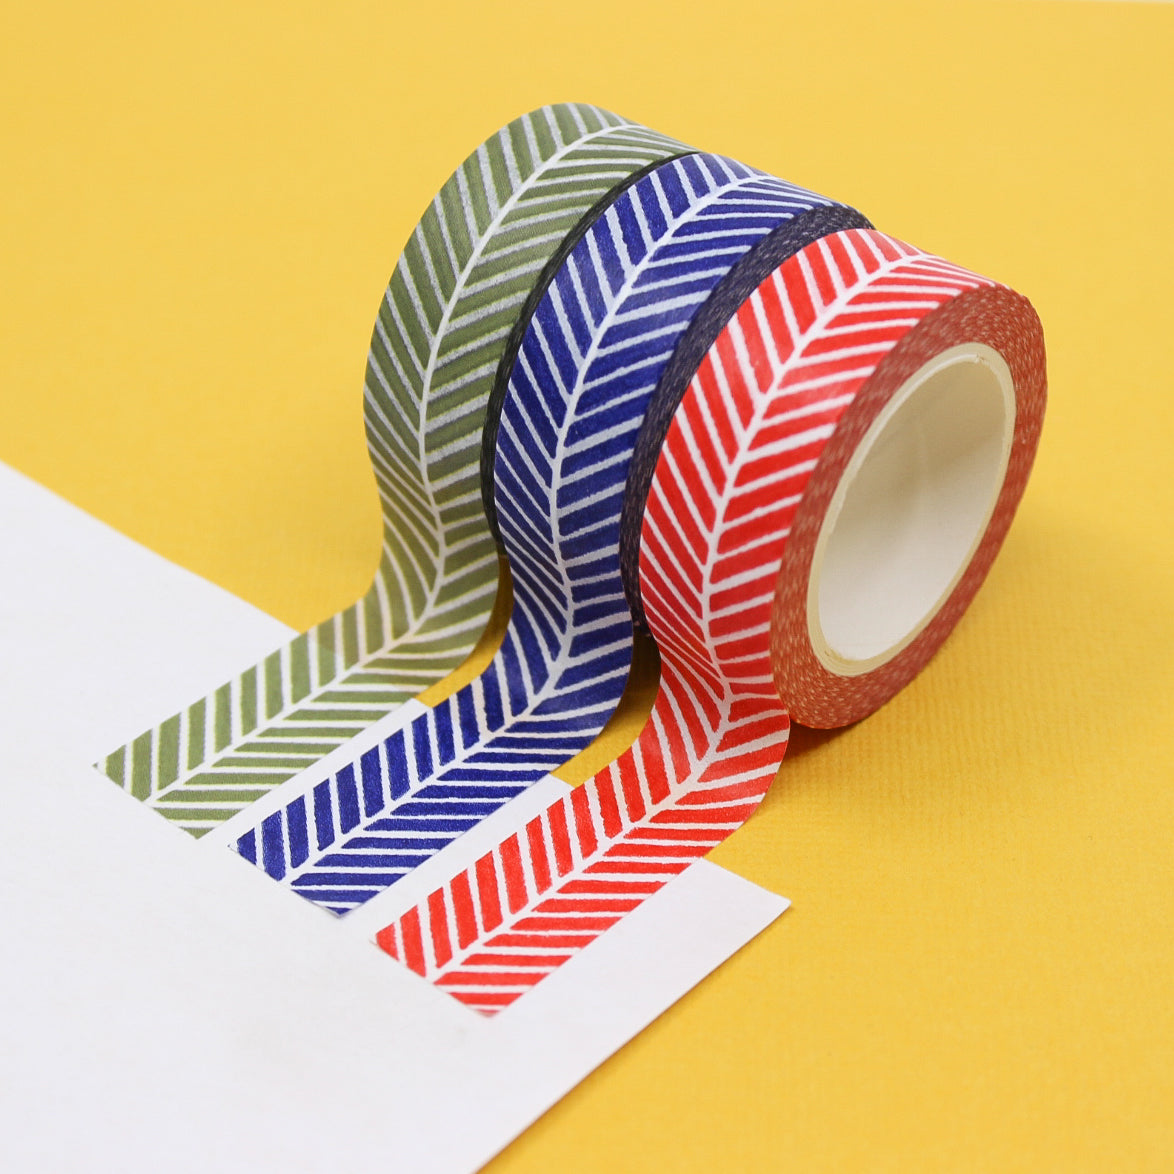 Elevate your projects with our Colorful Classic Herringbone Pattern Washi Tape, available in your choice of red, blue, or green. This tape adds a timeless and vibrant herringbone design to your creations. this tape is from Beve and sold at BBB Supplies Craft Shop.